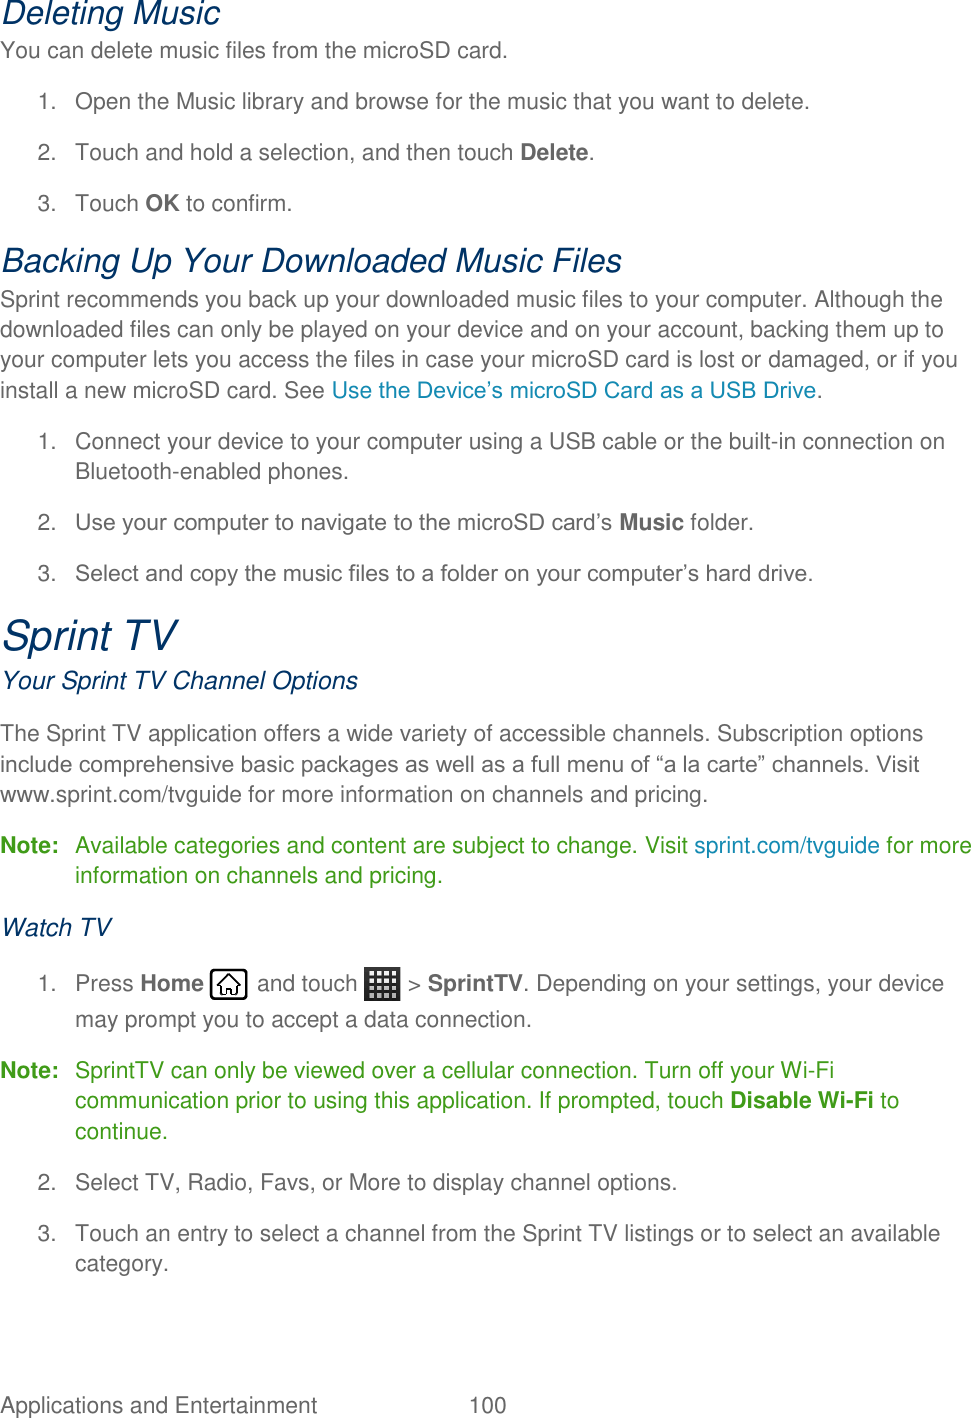 Applications and Entertainment  100   Deleting Music You can delete music files from the microSD card. 1.  Open the Music library and browse for the music that you want to delete. 2.  Touch and hold a selection, and then touch Delete. 3.  Touch OK to confirm. Backing Up Your Downloaded Music Files Sprint recommends you back up your downloaded music files to your computer. Although the downloaded files can only be played on your device and on your account, backing them up to your computer lets you access the files in case your microSD card is lost or damaged, or if you install a new microSD card. See Use the Device’s microSD Card as a USB Drive. 1.  Connect your device to your computer using a USB cable or the built-in connection on Bluetooth-enabled phones. 2. Use your computer to navigate to the microSD card’s Music folder. 3. Select and copy the music files to a folder on your computer’s hard drive. Sprint TV Your Sprint TV Channel Options The Sprint TV application offers a wide variety of accessible channels. Subscription options include comprehensive basic packages as well as a full menu of “a la carte” channels. Visit www.sprint.com/tvguide for more information on channels and pricing. Note:  Available categories and content are subject to change. Visit sprint.com/tvguide for more information on channels and pricing. Watch TV 1.  Press Home   and touch   &gt; SprintTV. Depending on your settings, your device may prompt you to accept a data connection. Note:  SprintTV can only be viewed over a cellular connection. Turn off your Wi-Fi communication prior to using this application. If prompted, touch Disable Wi-Fi to continue. 2.  Select TV, Radio, Favs, or More to display channel options. 3.  Touch an entry to select a channel from the Sprint TV listings or to select an available category. 